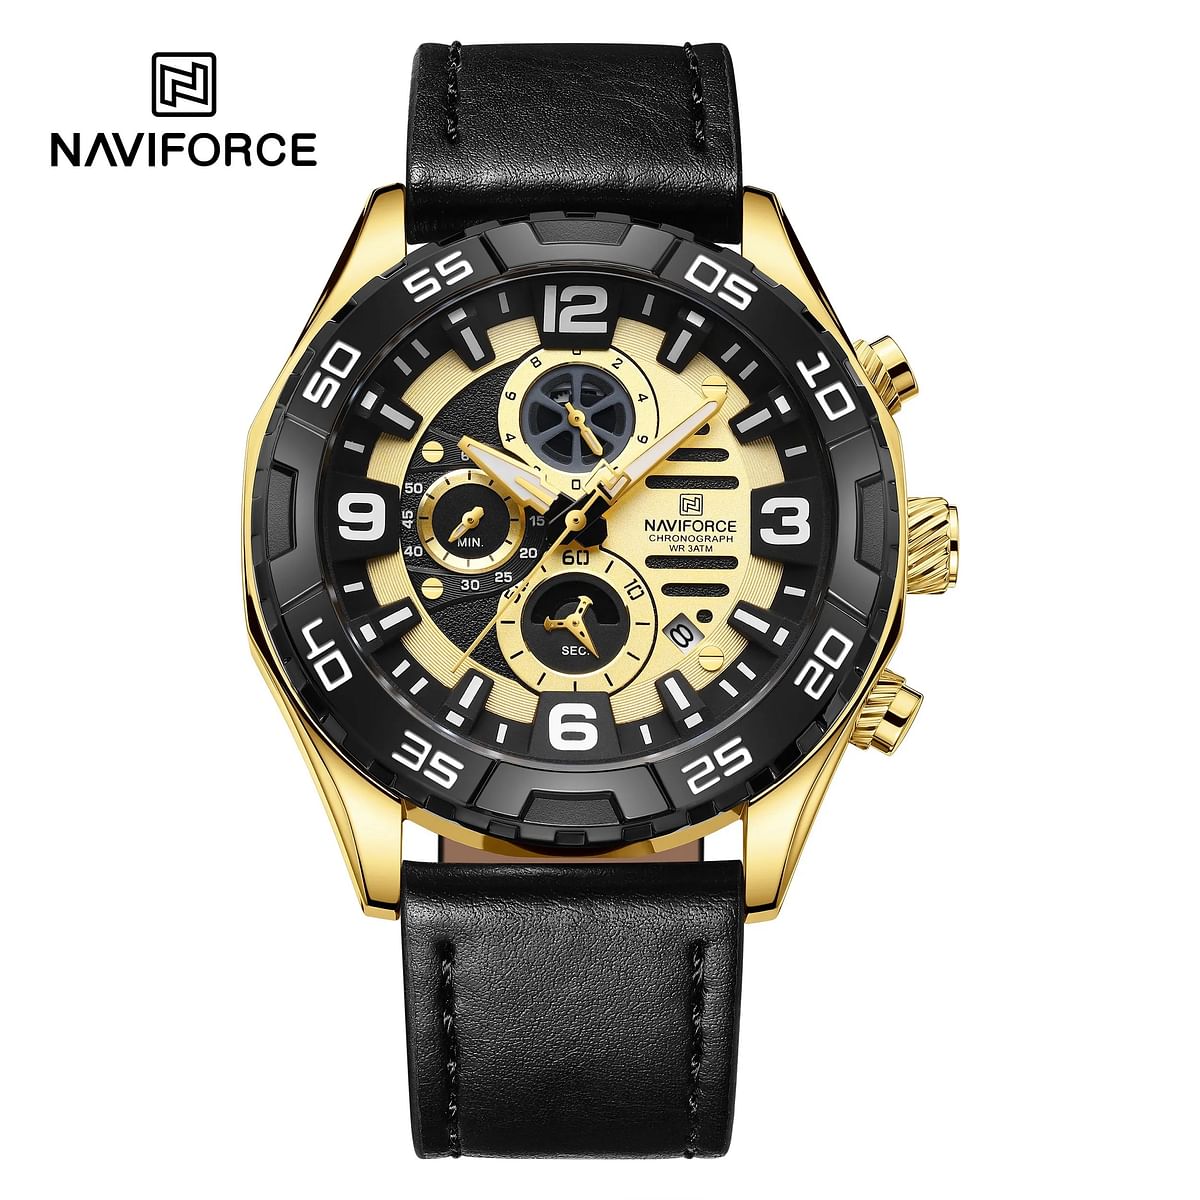 NAVIFORCE NF8043 CHRONOGLIDE Men’s Watch Waterproof Luxury Style with Leather Strap - 46MM - Black And Gold